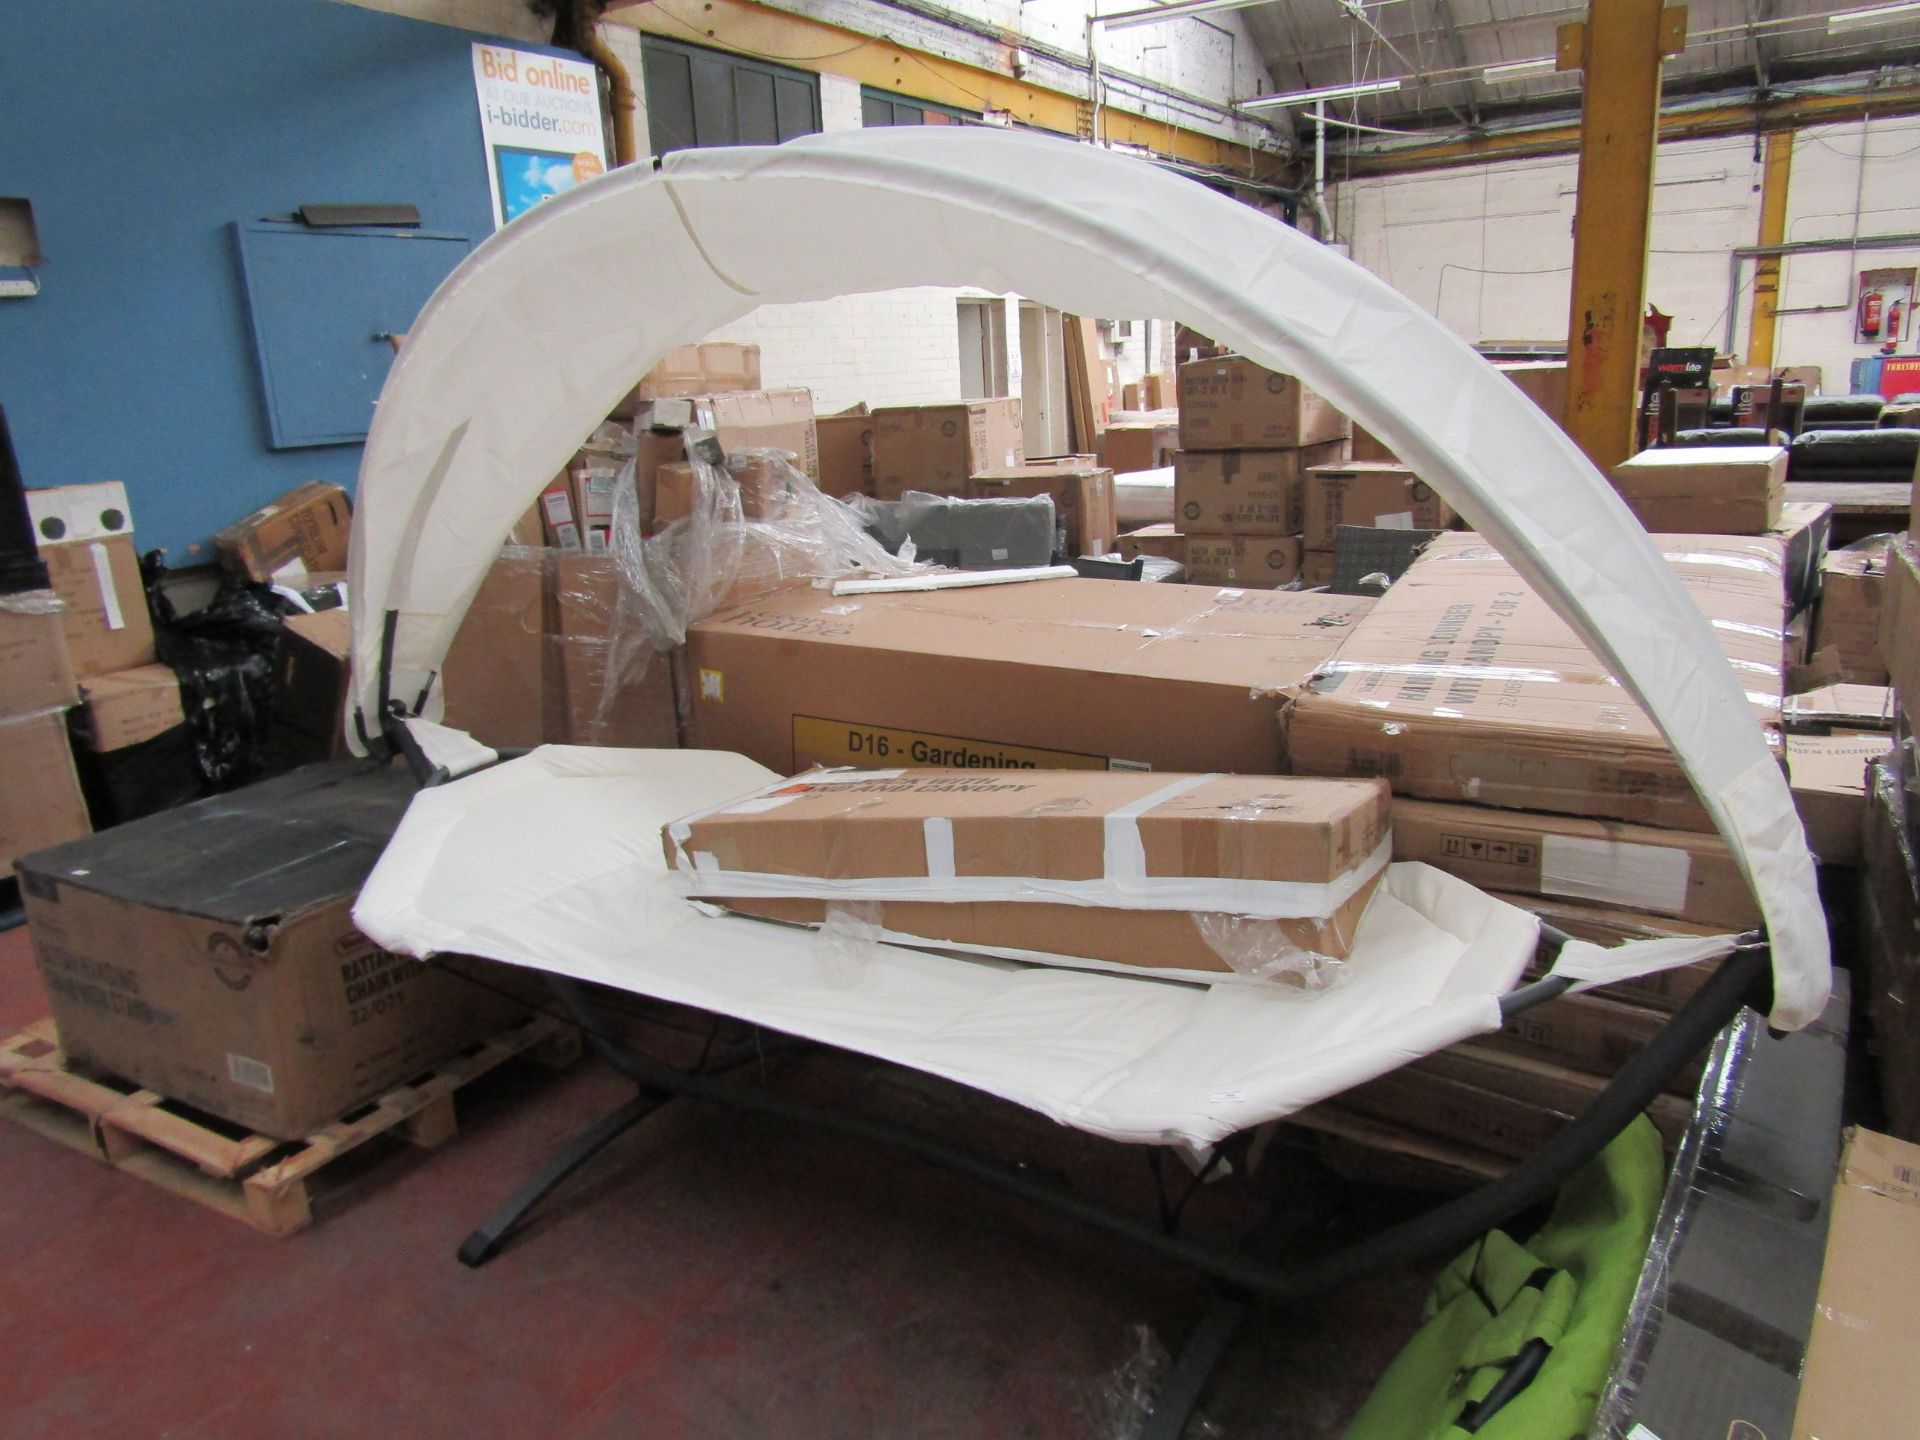 Hammock with canopy, this is the display and will either need to be transport via van or